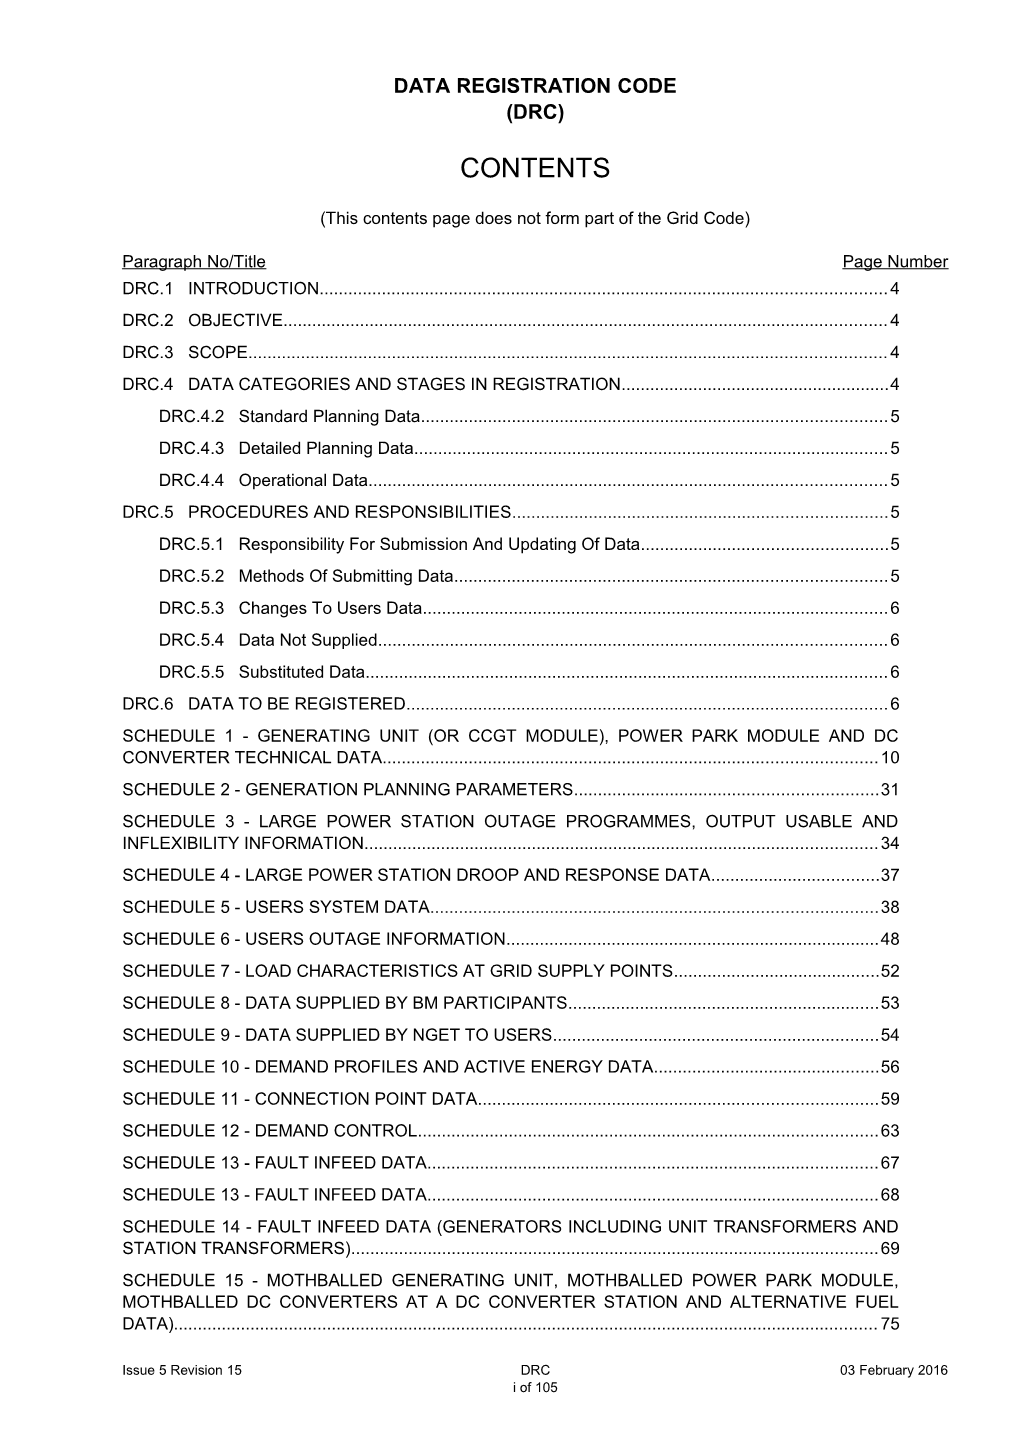 This Contents Page Does Not Form Part of the Grid Code